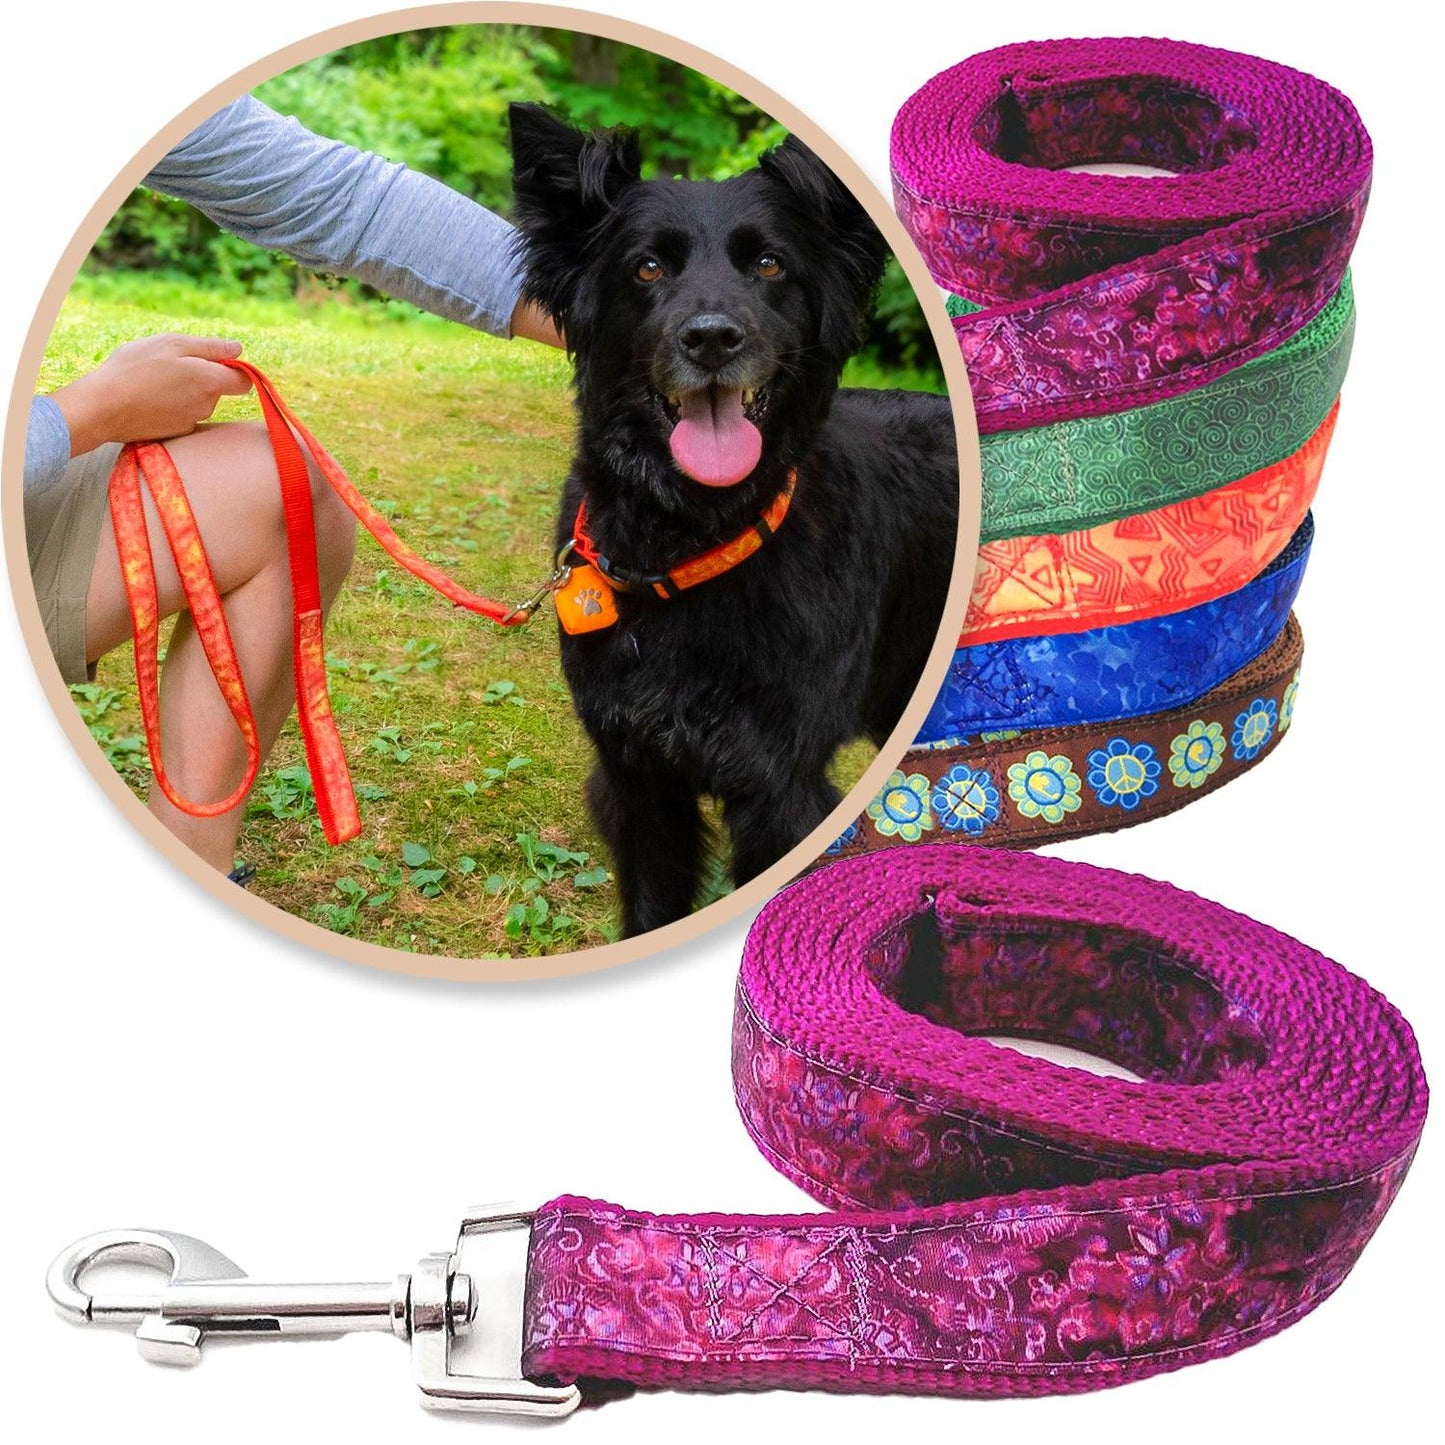 Purple batik inspired leash shown with a black dog and variety of colors and styles